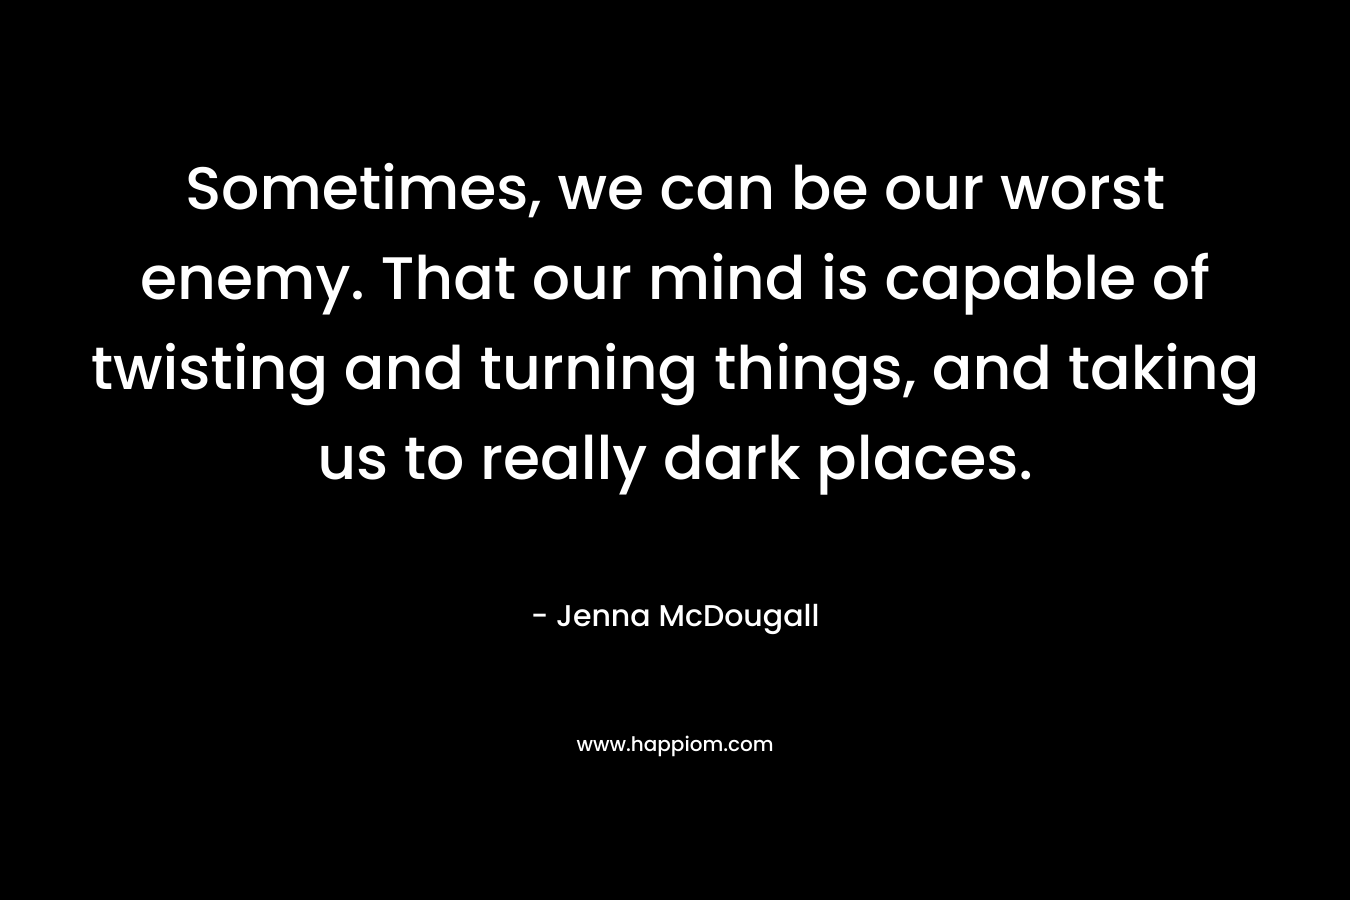 Sometimes, we can be our worst enemy. That our mind is capable of twisting and turning things, and taking us to really dark places. – Jenna McDougall